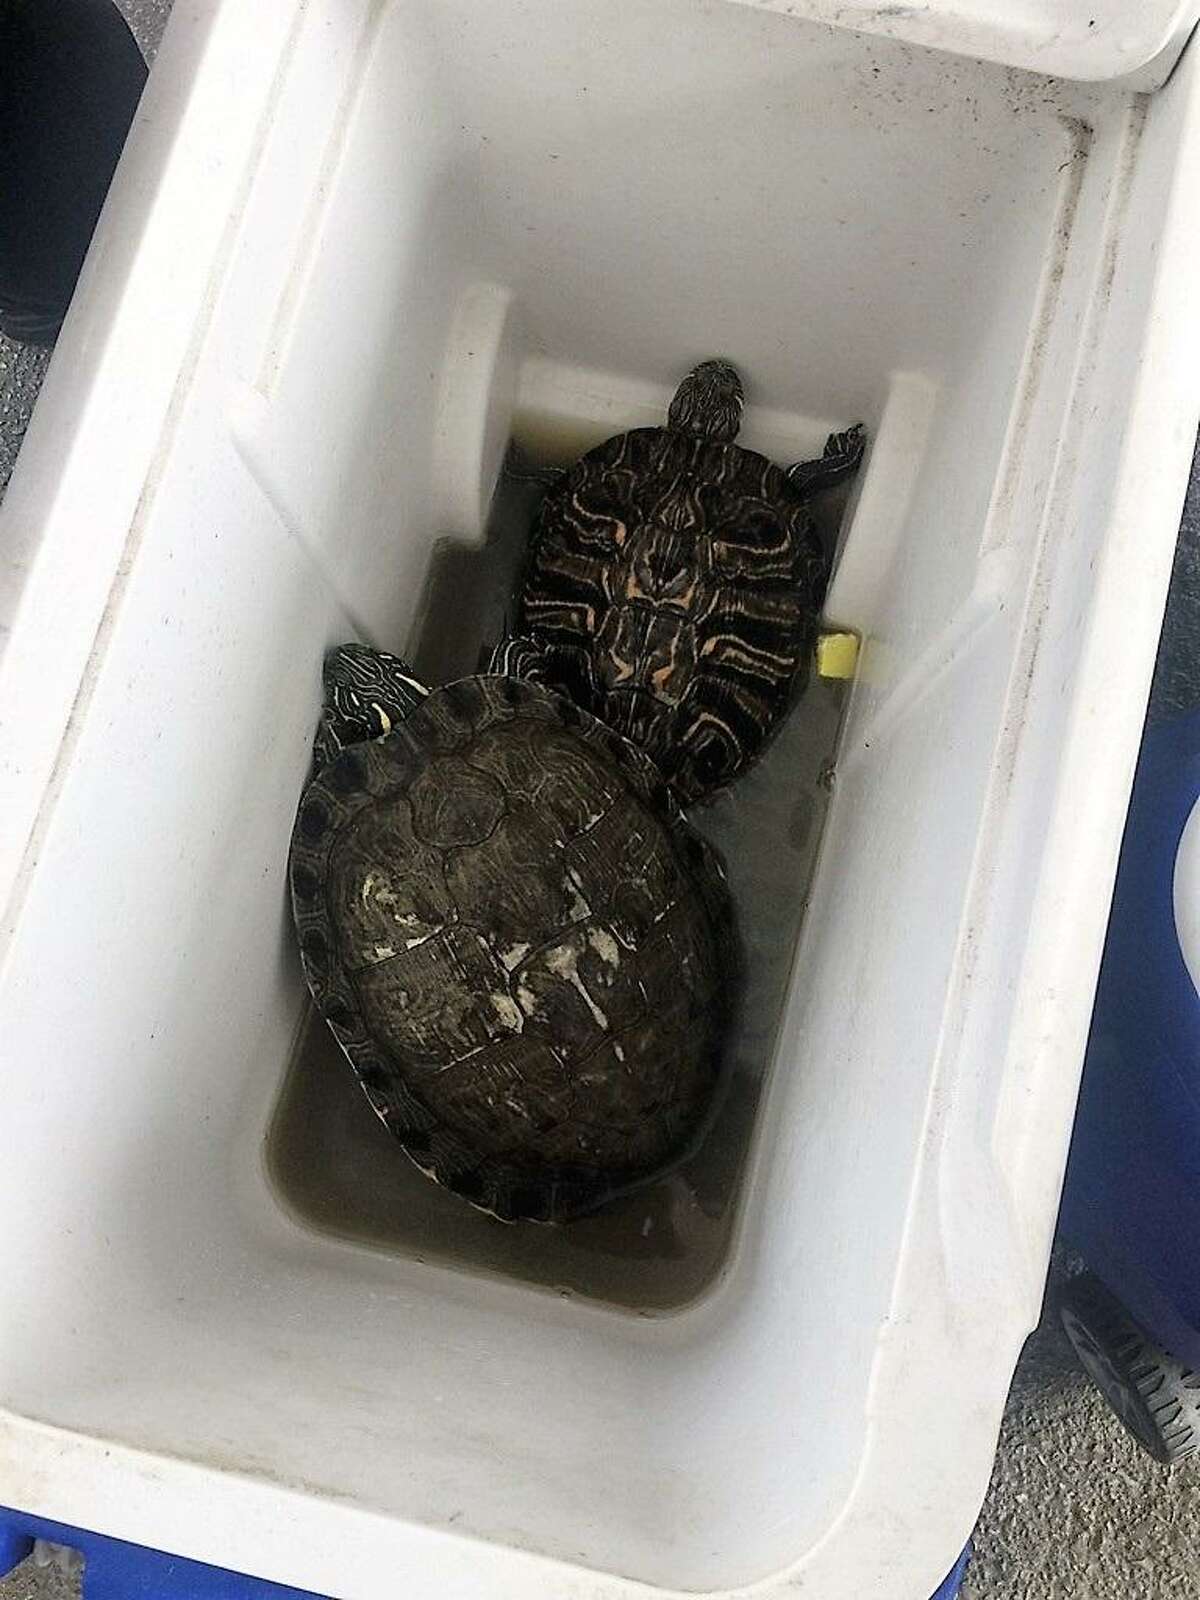 Animal Care Services officers rescued two turtles at an East Side apartment after the resident was evicted and left the pets behind along with another turtle and female pit bull mix.